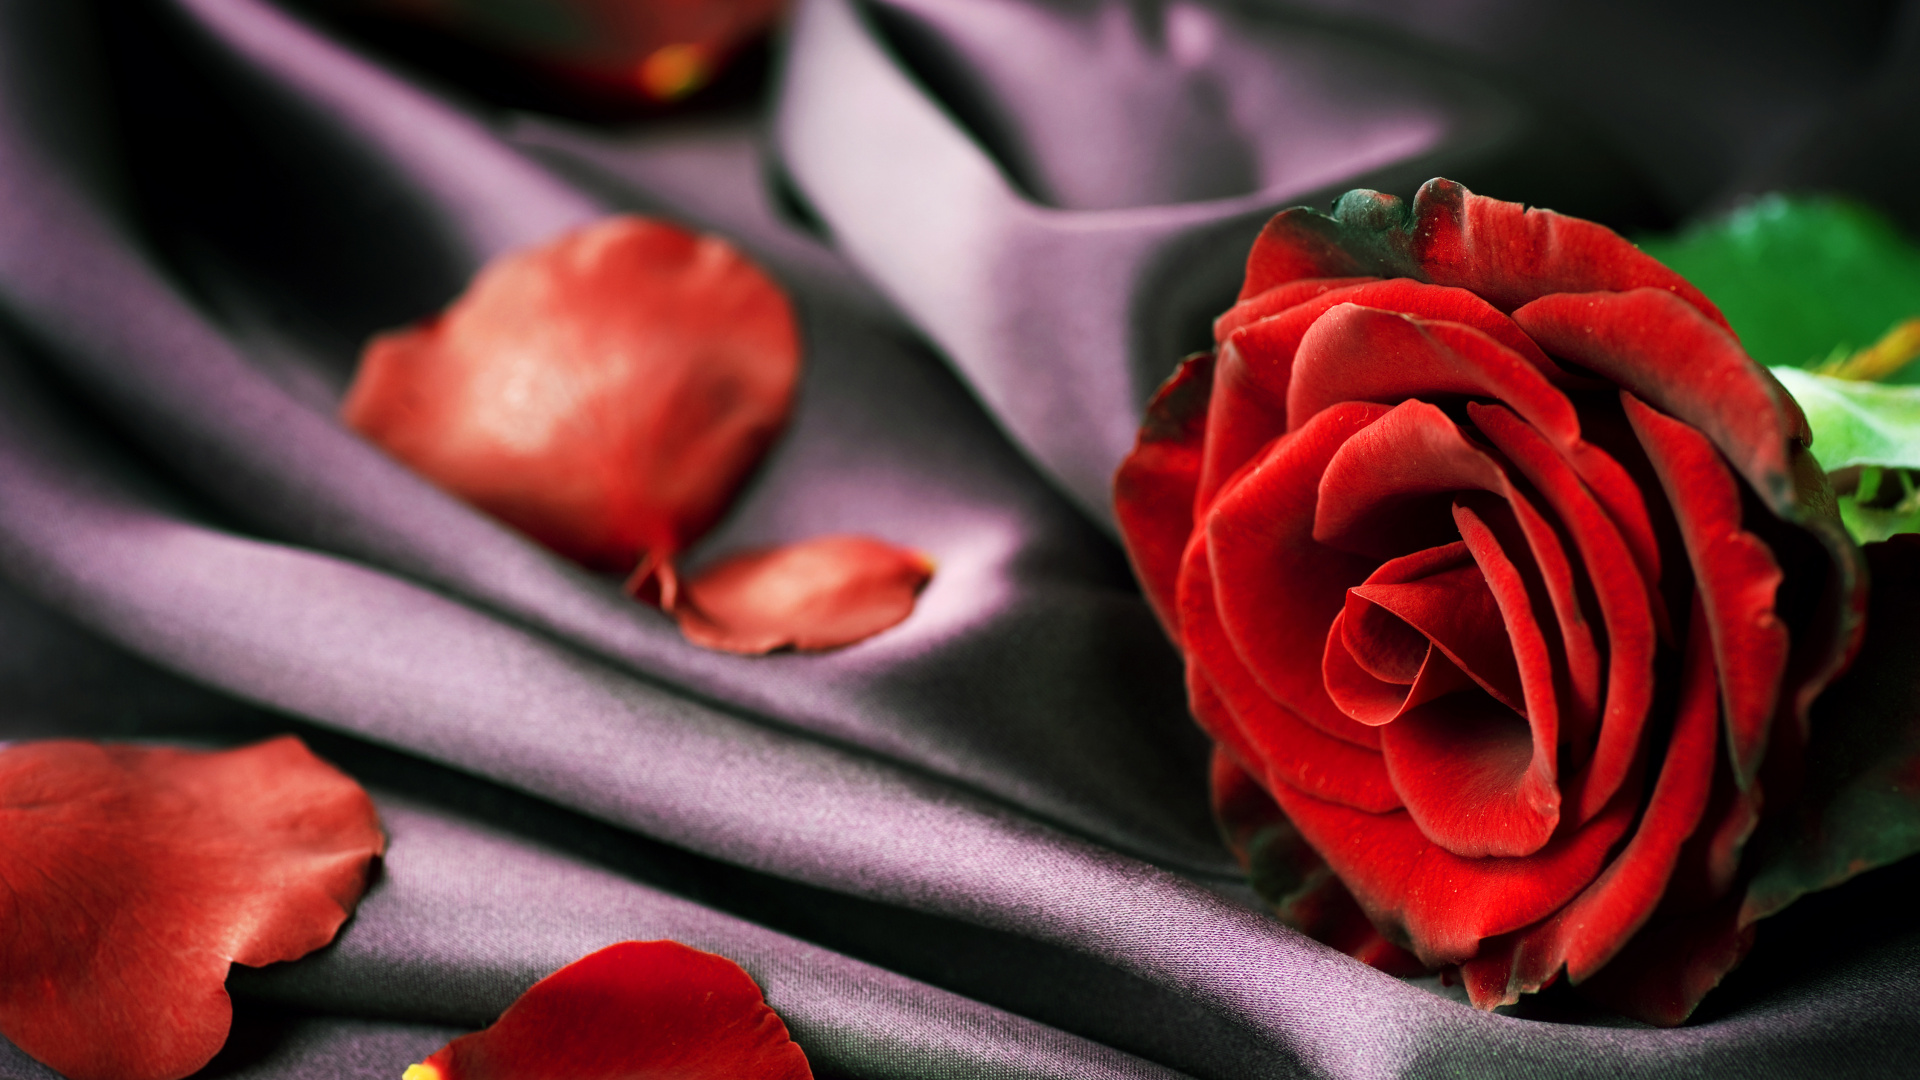 Red Rose on Gray Textile. Wallpaper in 1920x1080 Resolution